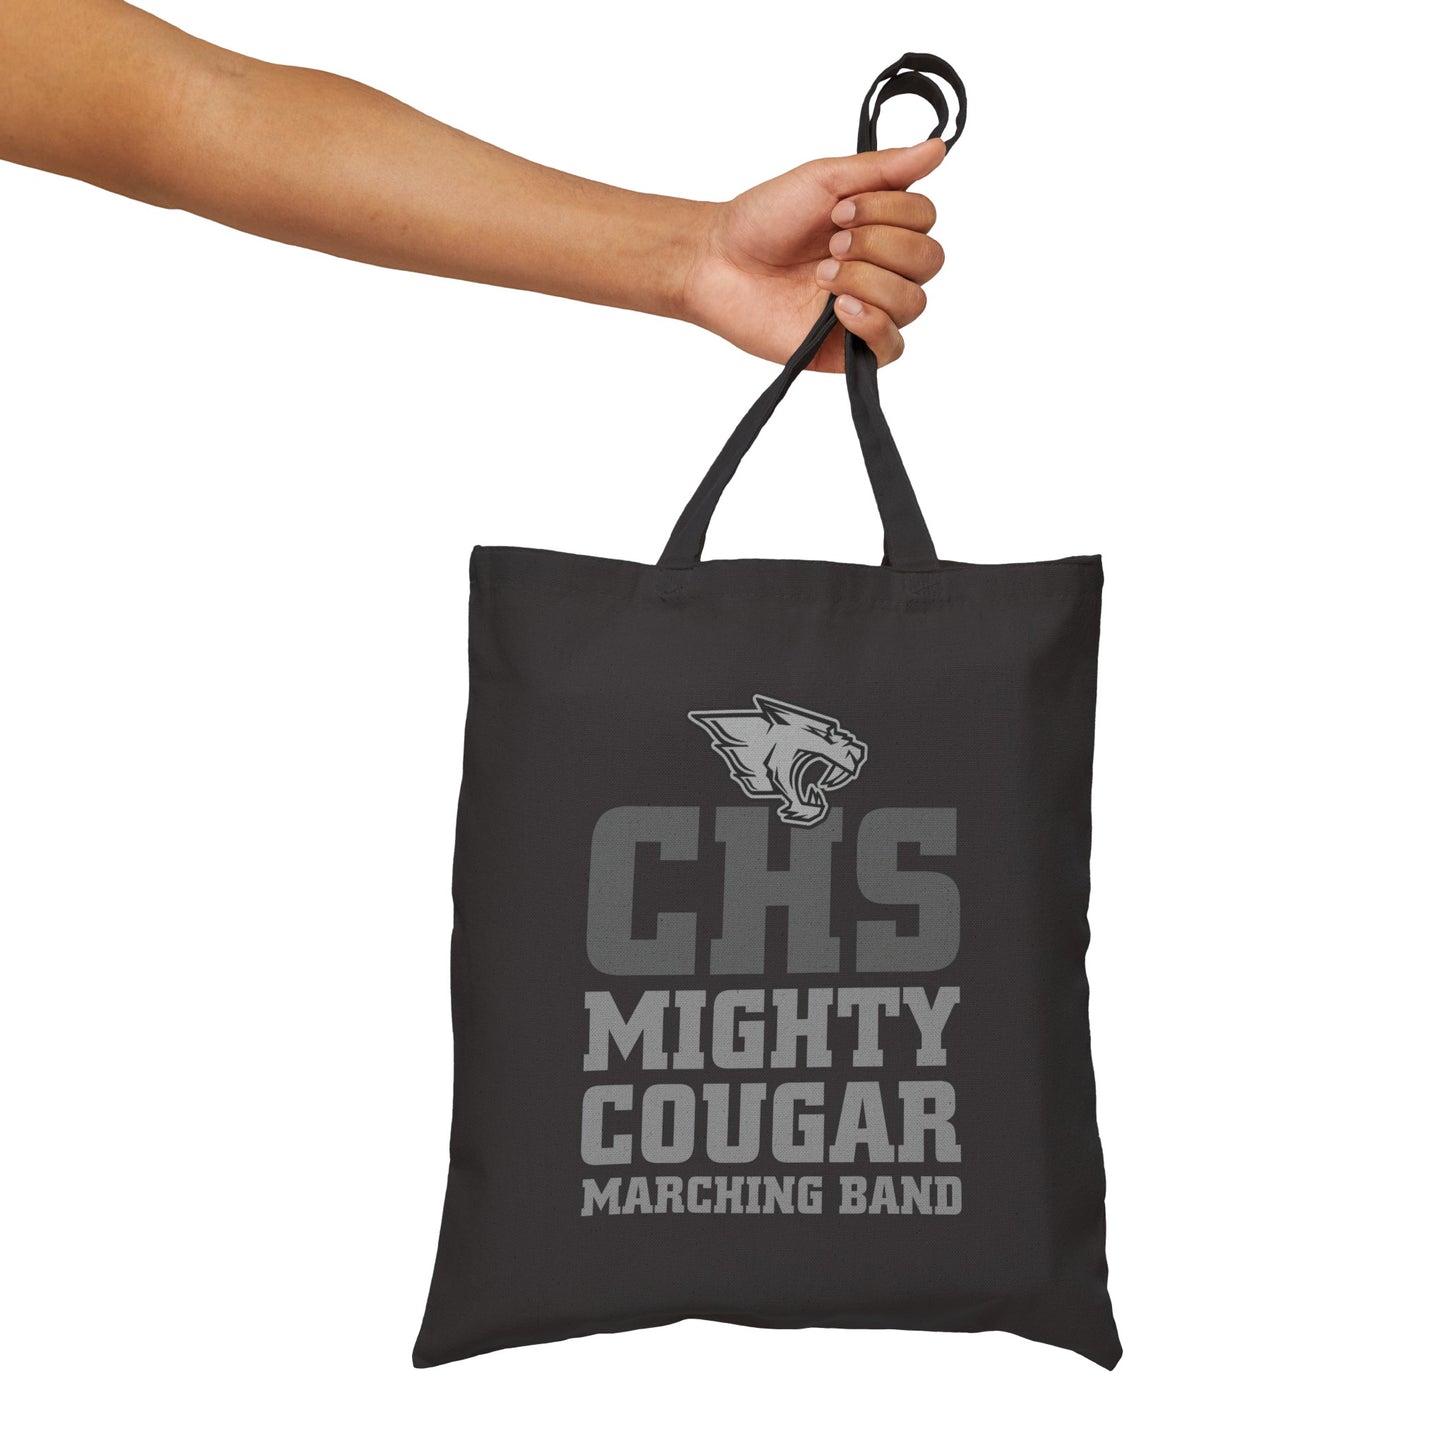 Mighty Cougar Marching Band - Cotton Canvas Tote Bag (Natural or Black)